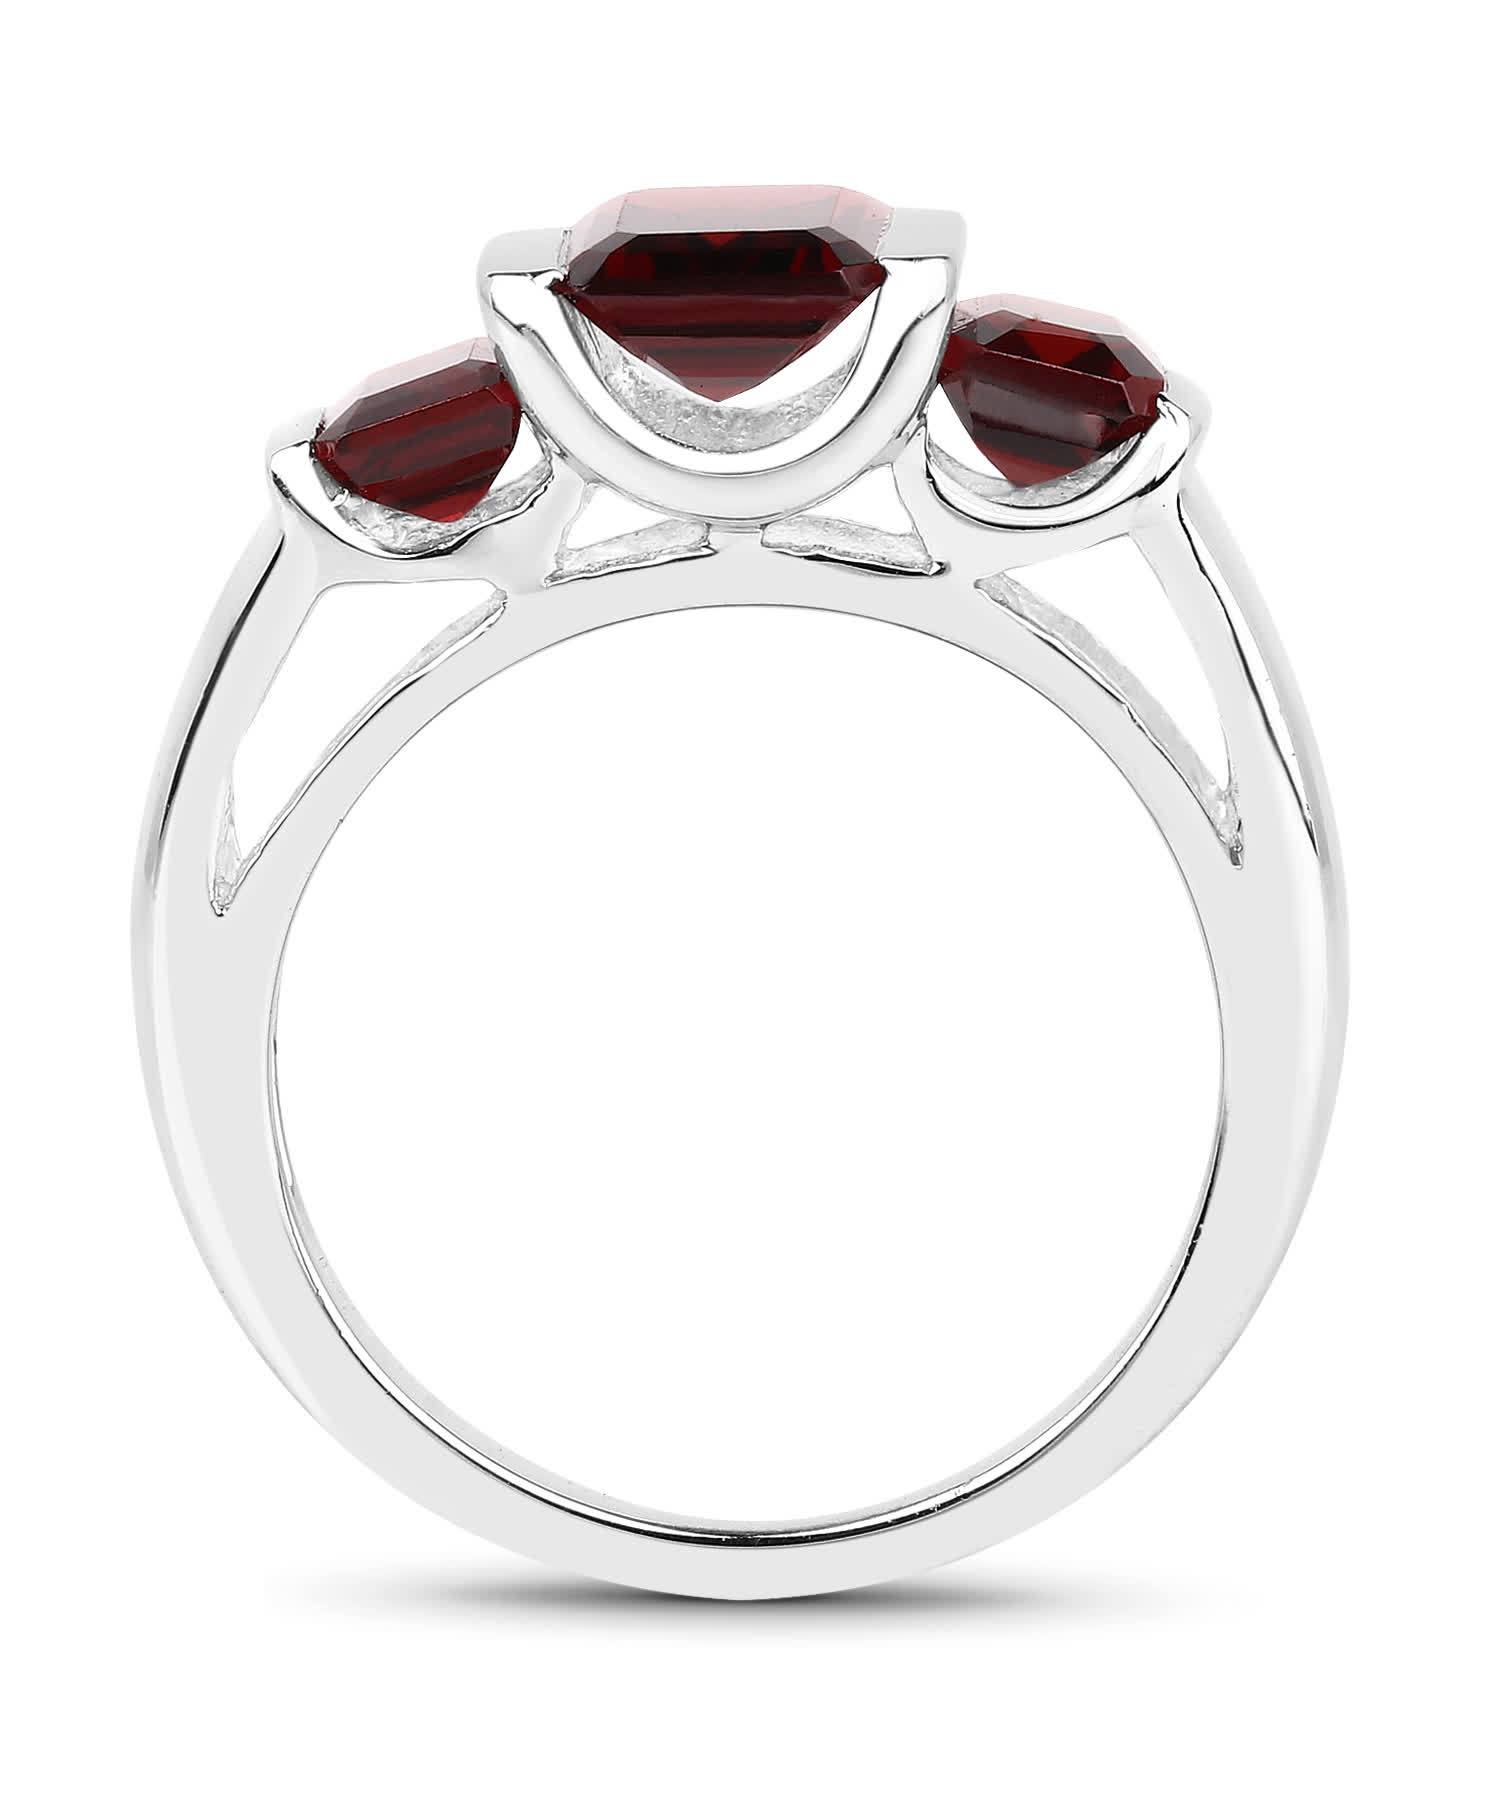 3.45ctw Natural Garnet Rhodium Plated 925 Sterling Silver Three-Stone Right Hand Ring View 2